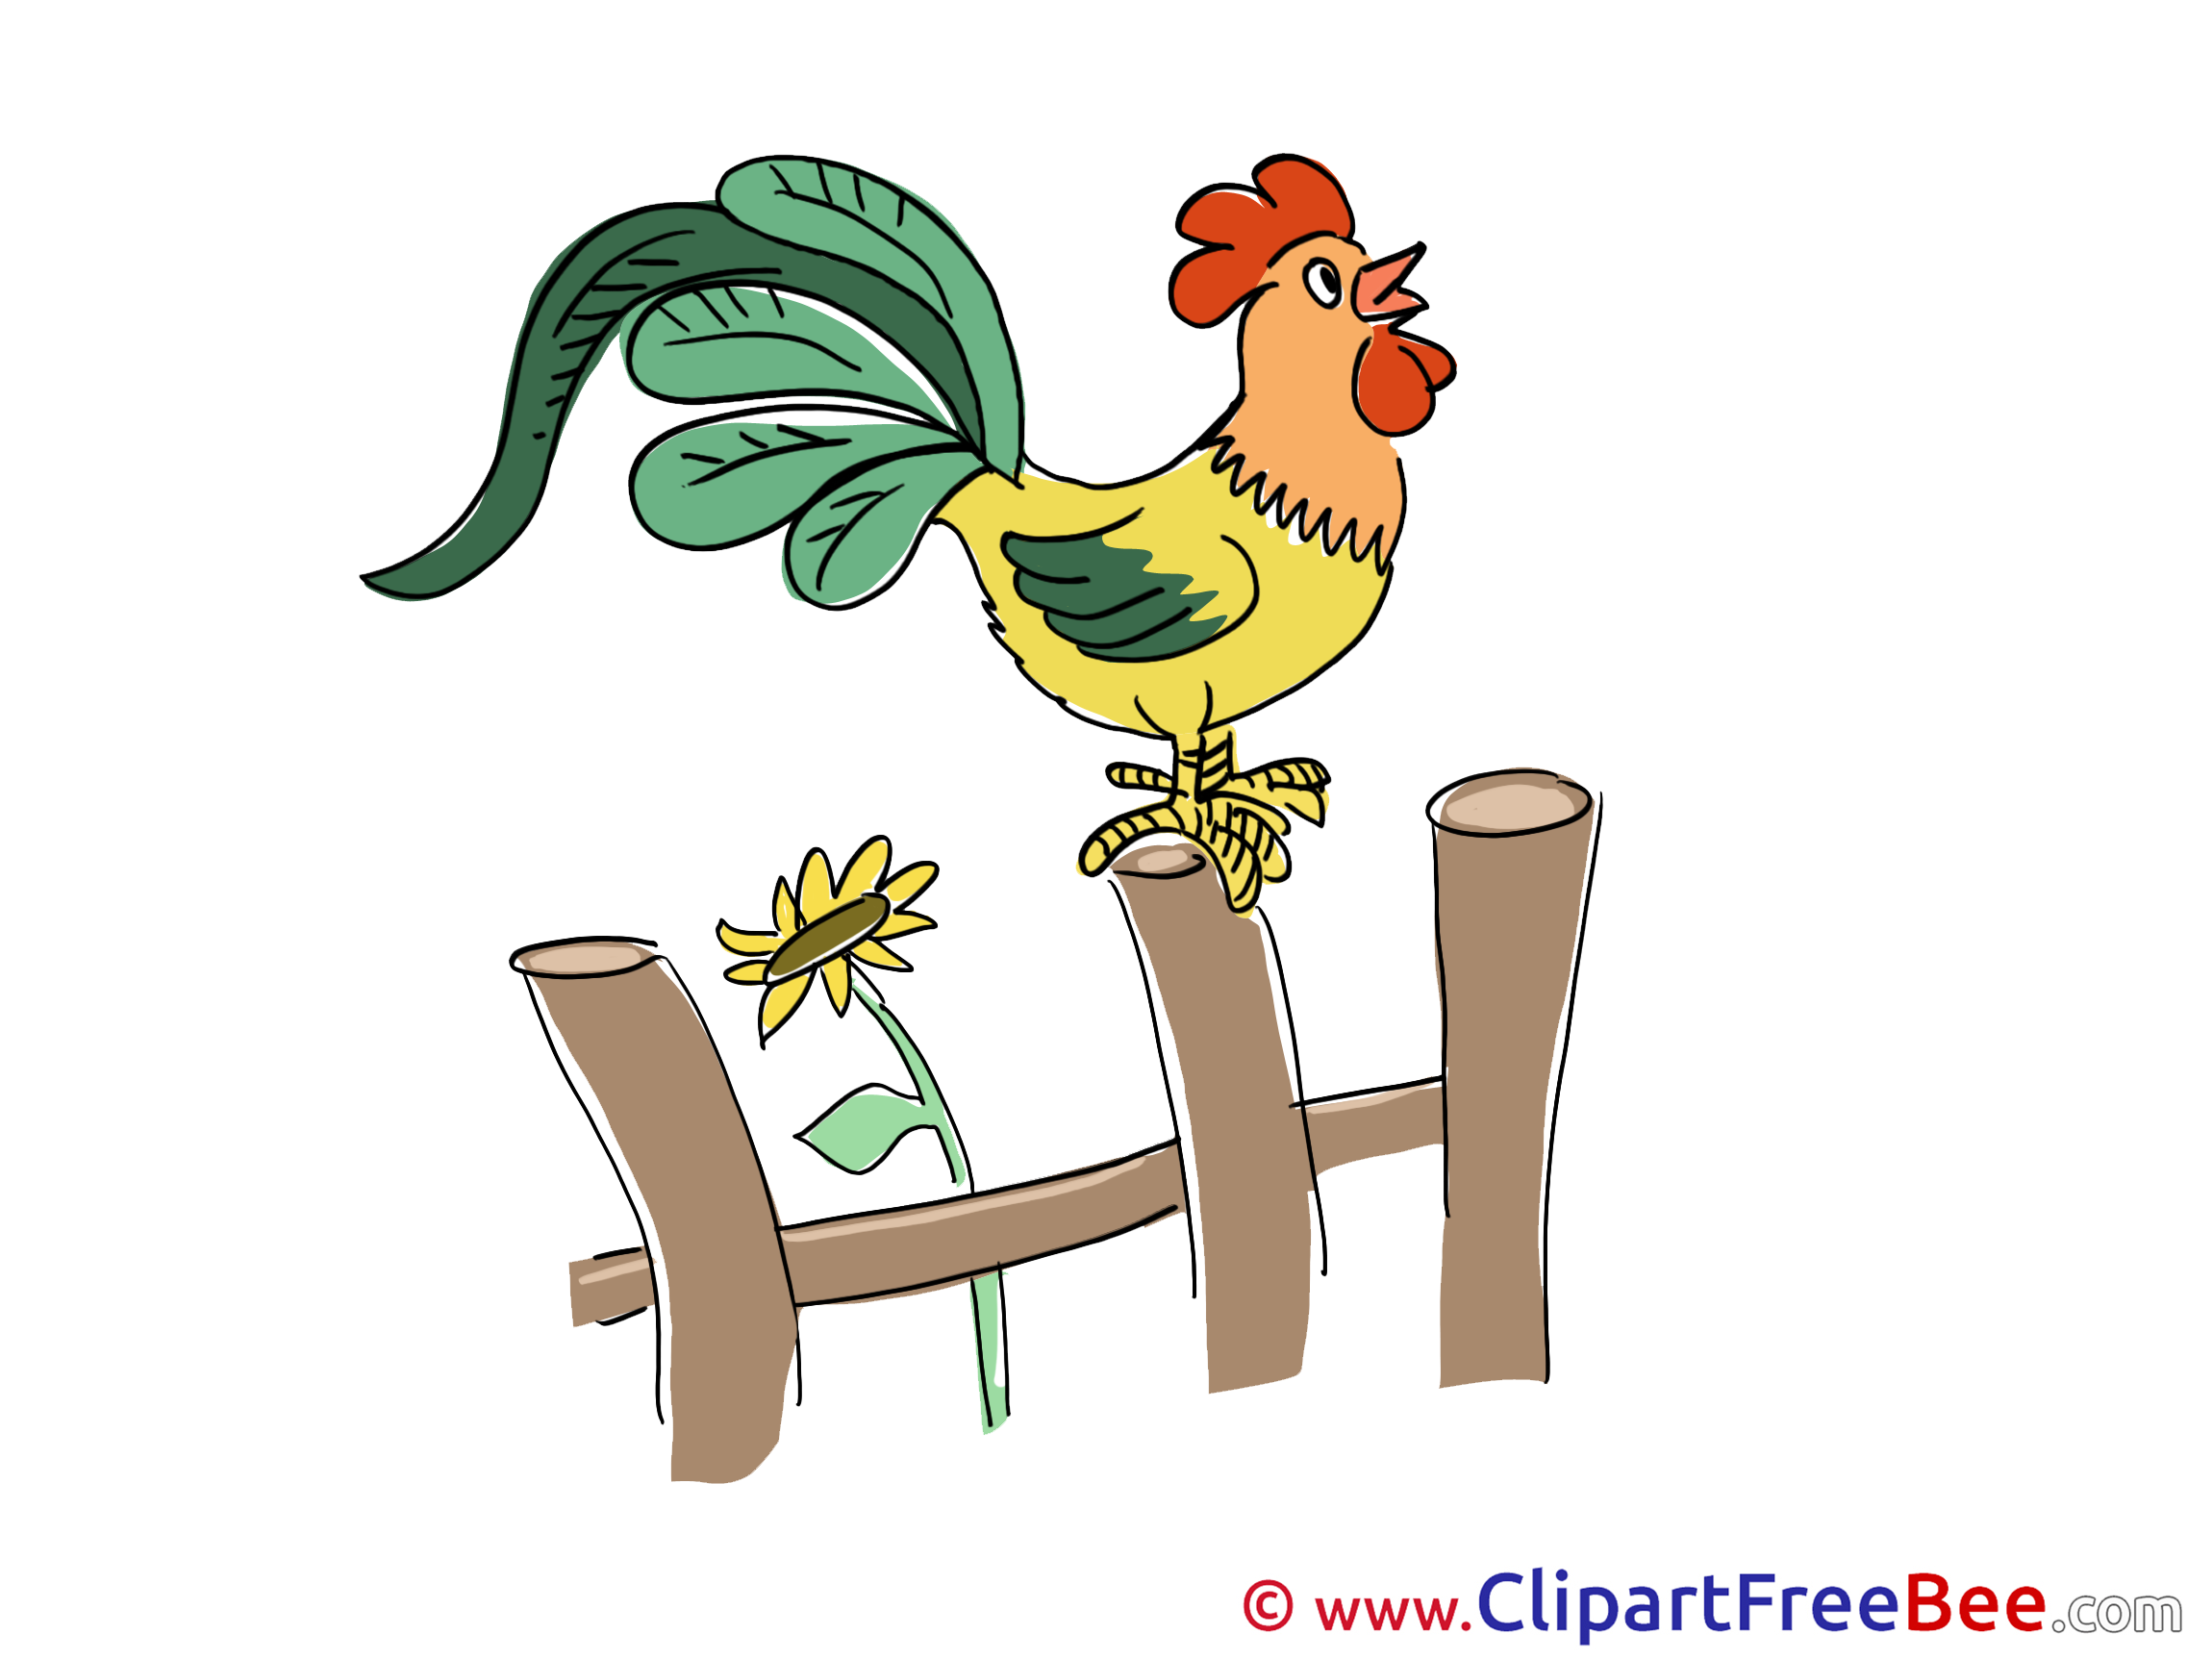 Fence Cock Clipart free Image download